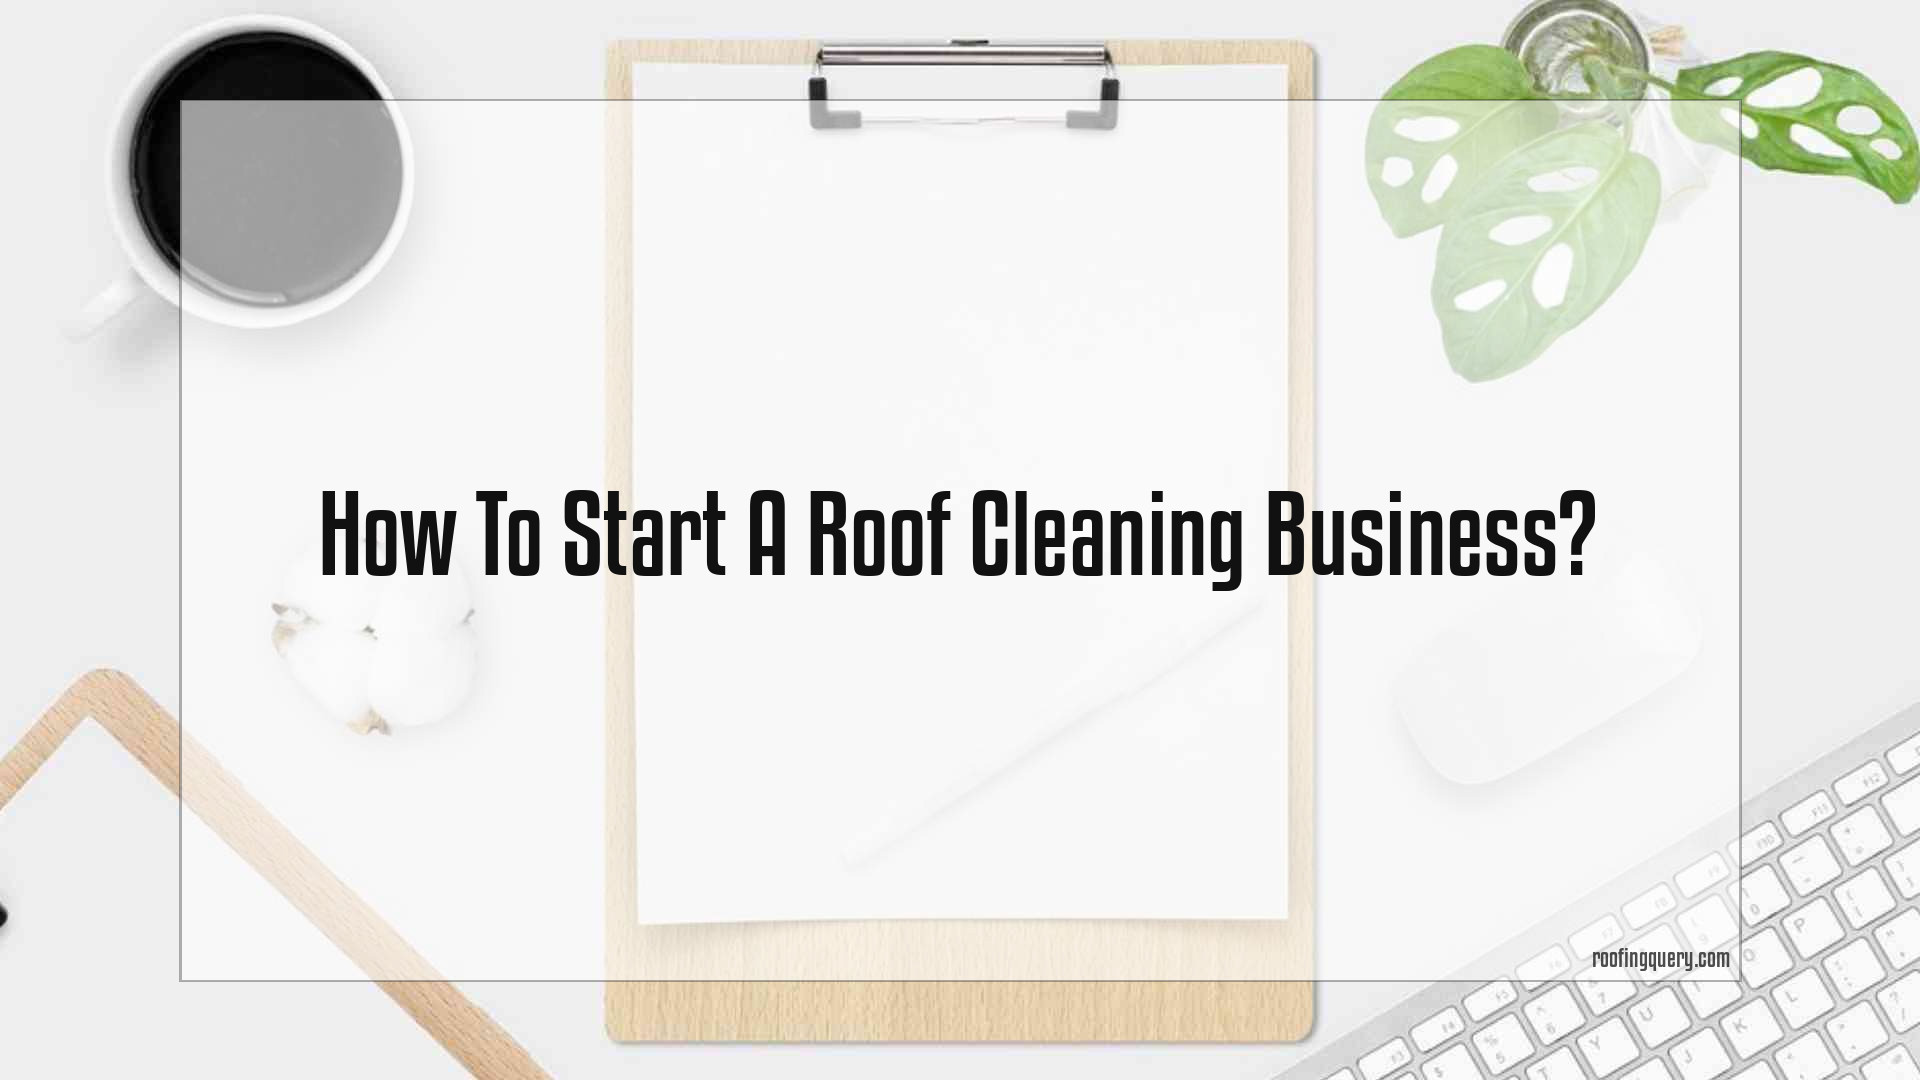 How To Start A Roof Cleaning Business